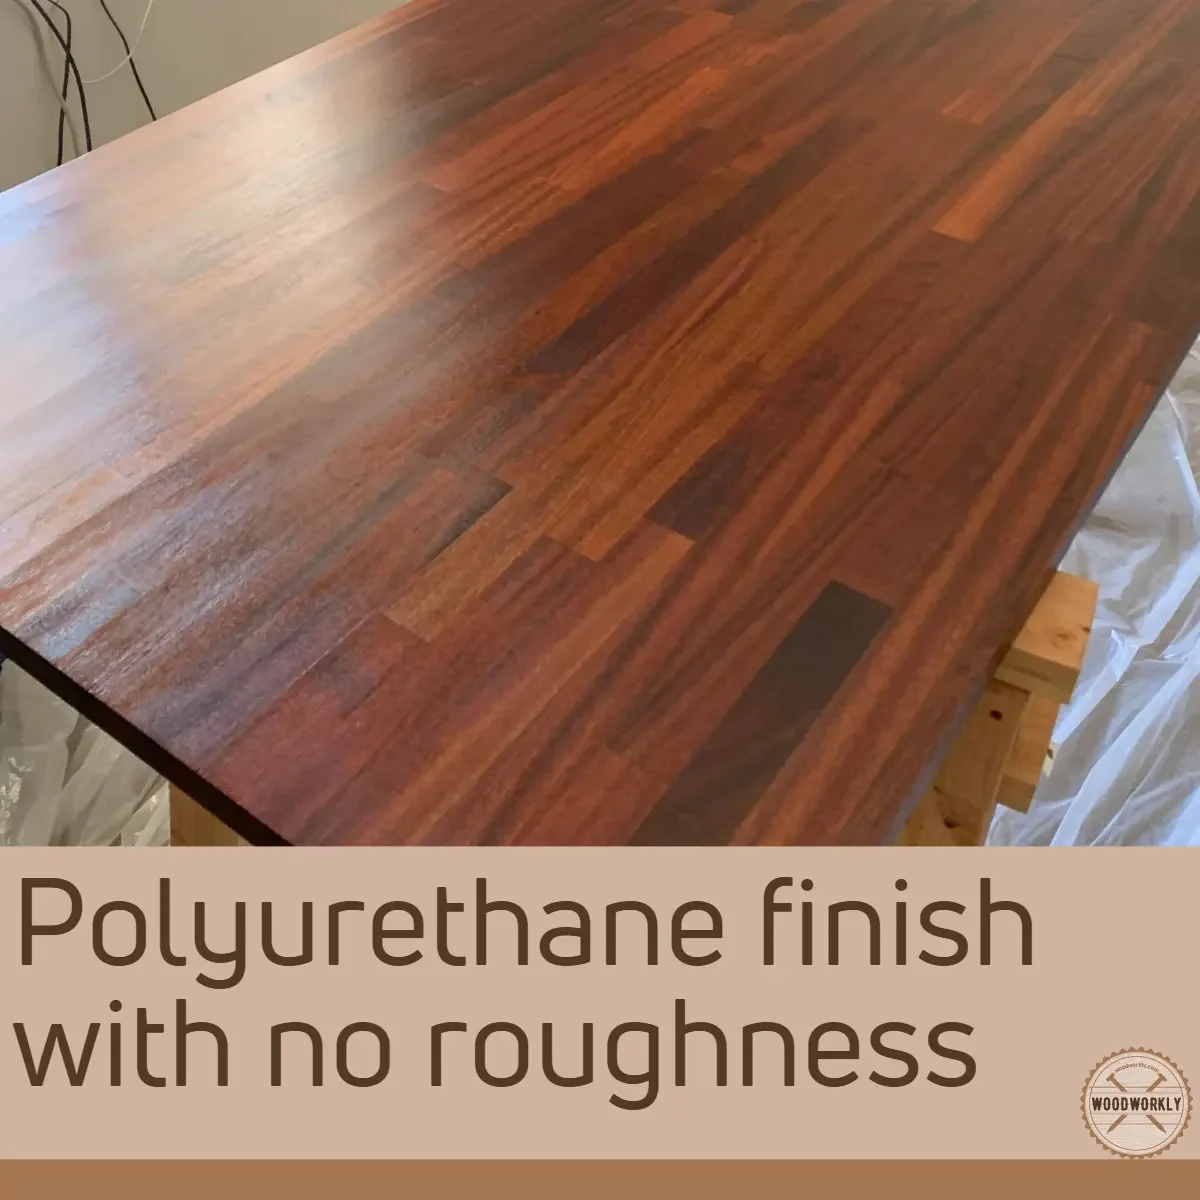 Polyurethane finish with no roughness